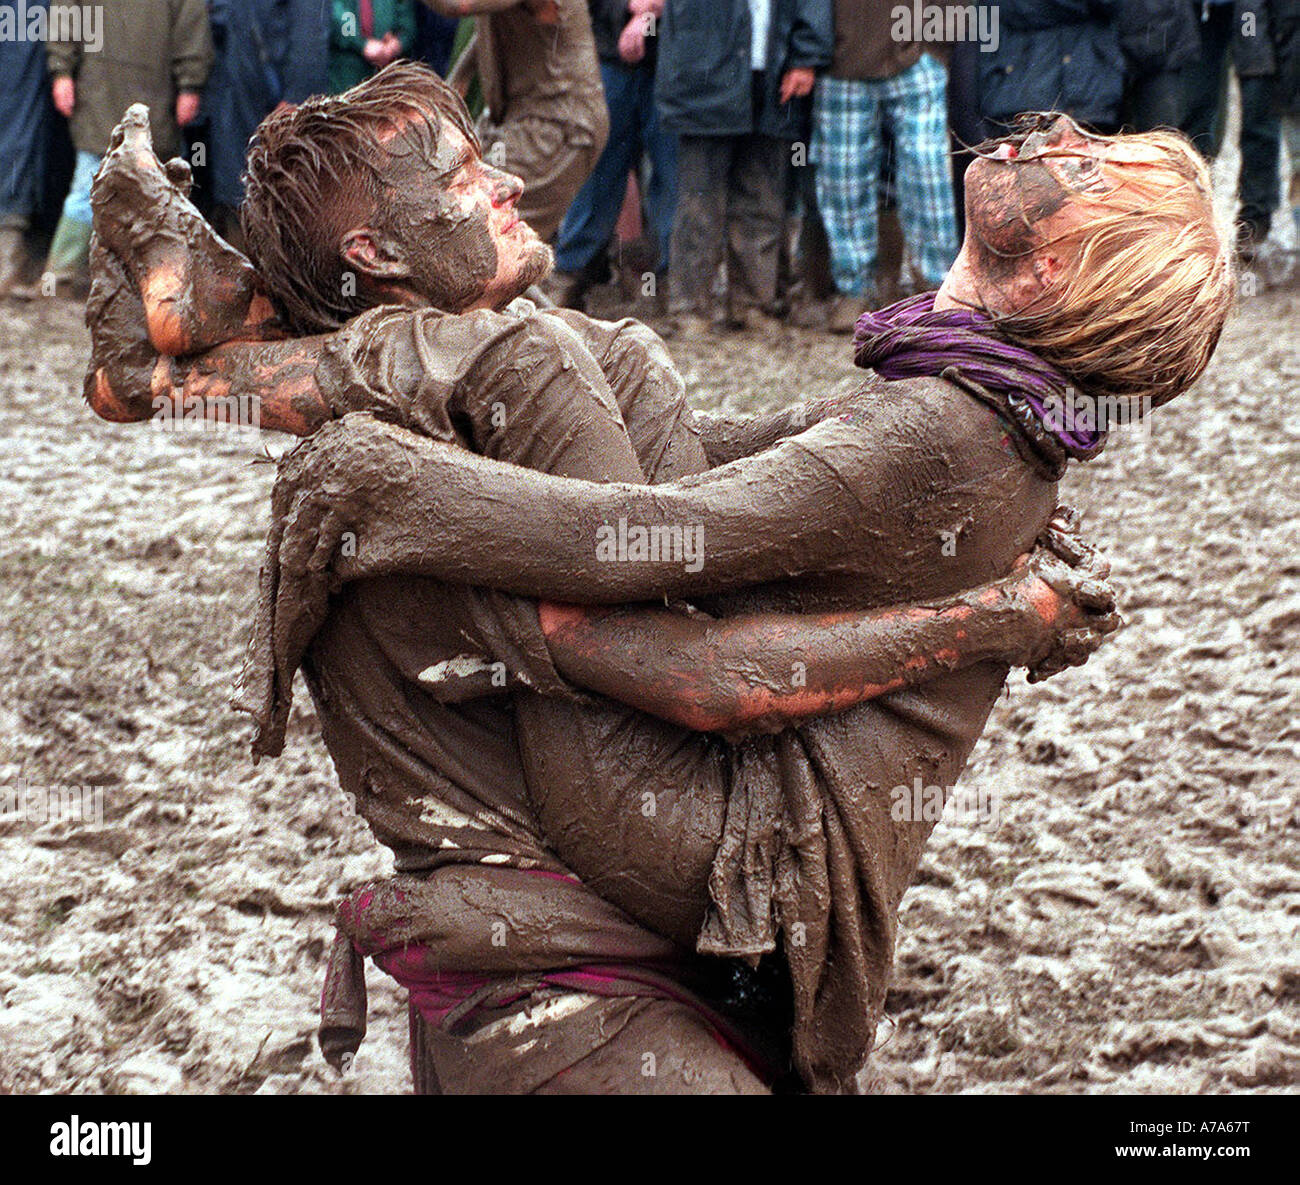 [Image: mud-wrestling-weather-a-couple-embrace-i...A7A67T.jpg]